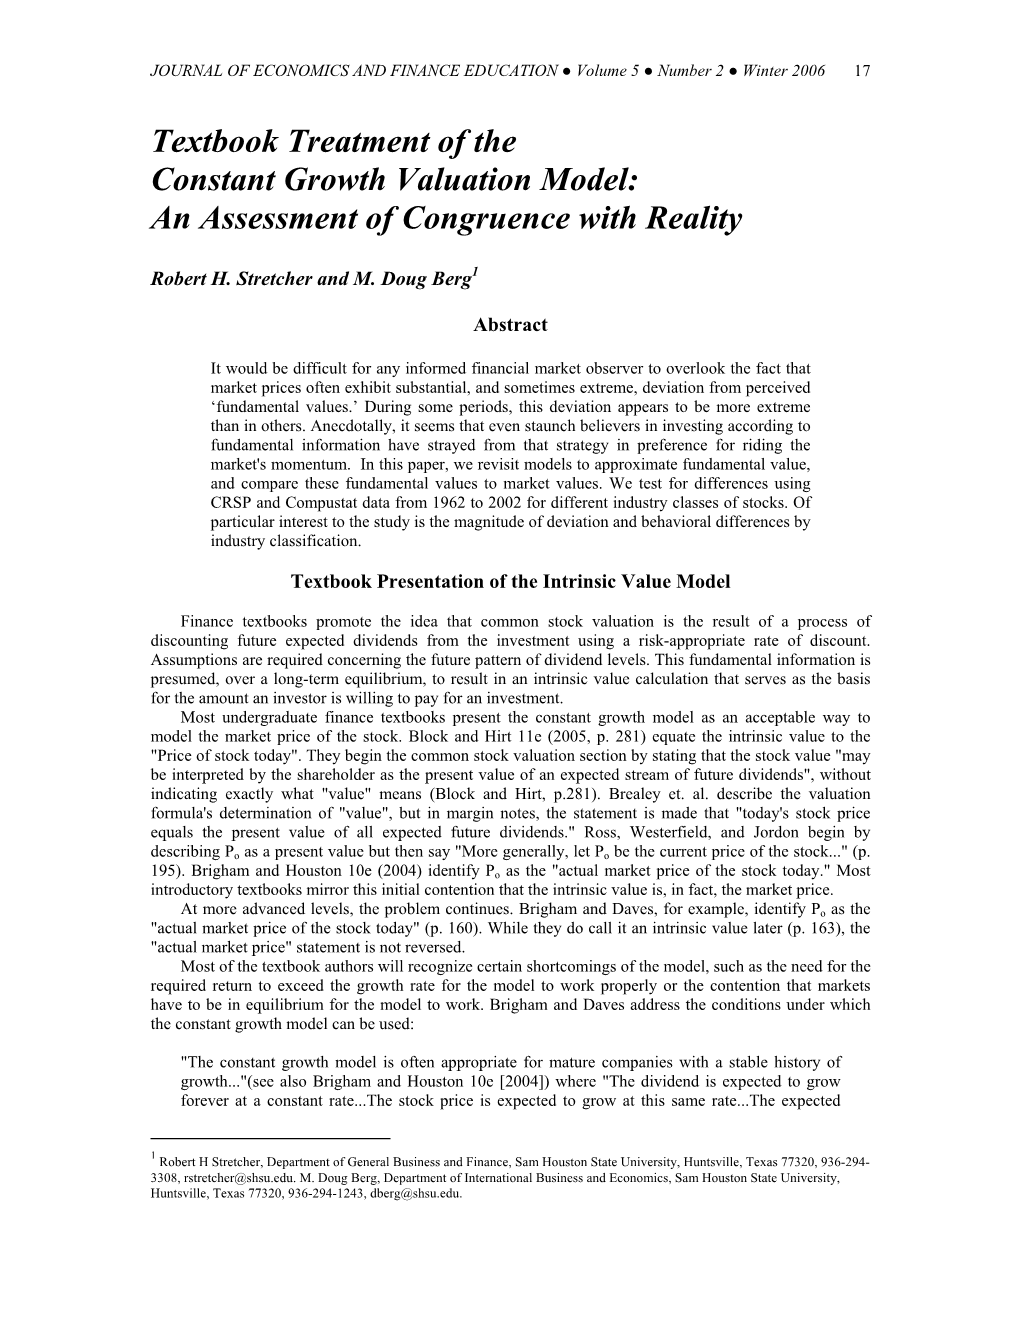 Textbook Treatment of the Constant Growth Valuation Model: an Assessment of Congruence with Reality